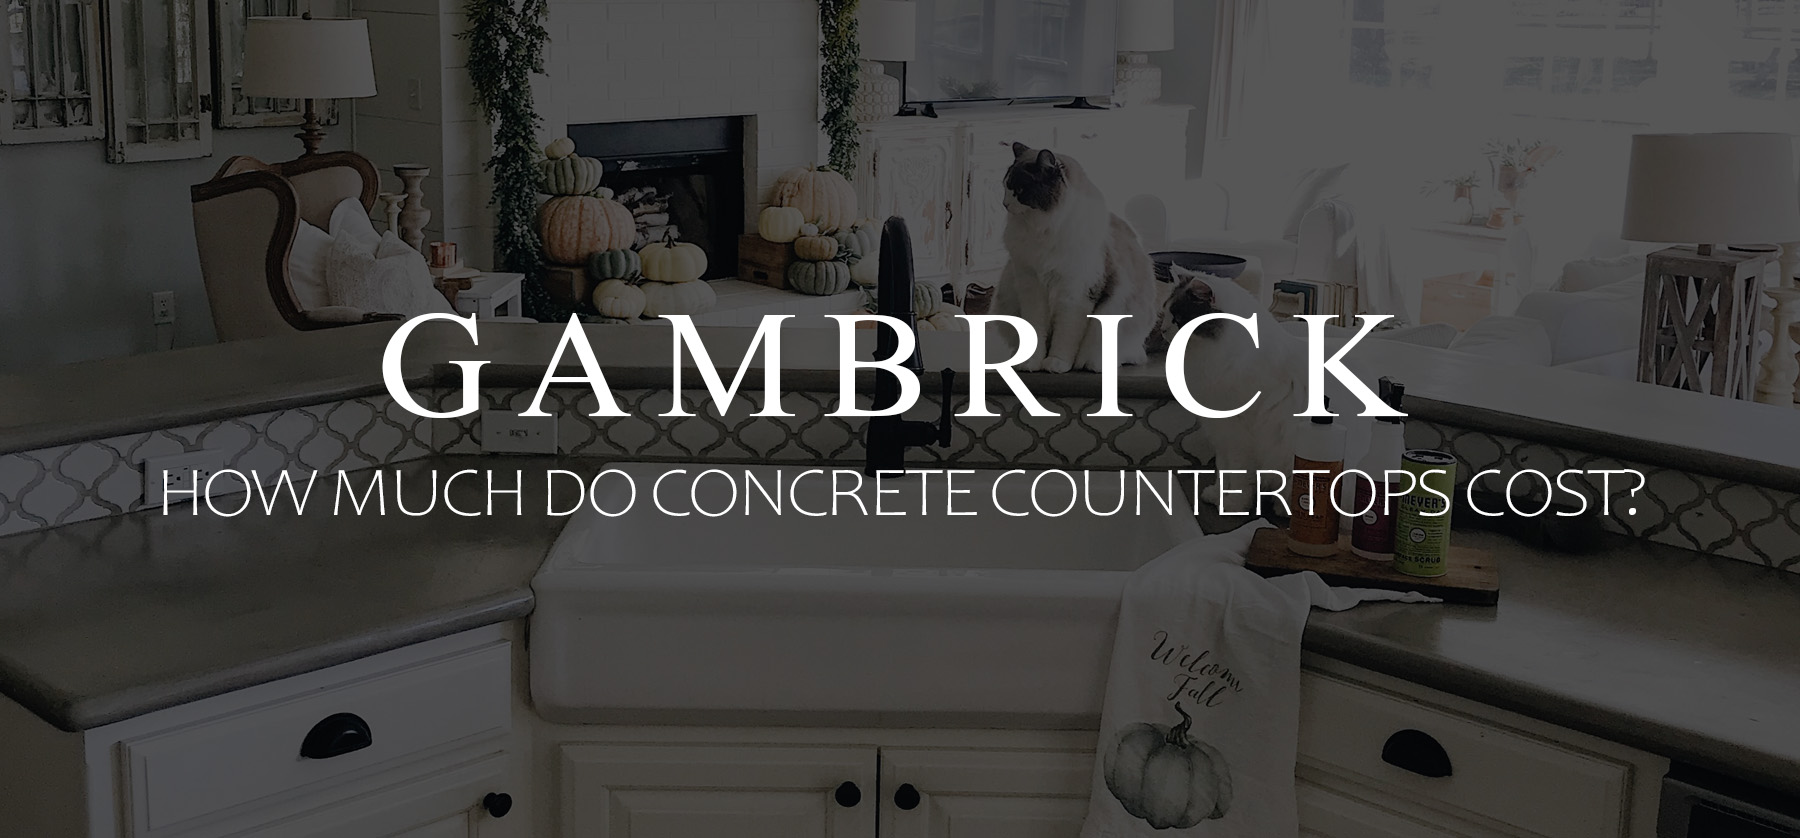 How Much Do Concrete Countertops Cost, How Much Does It Cost To Put Concrete Countertops